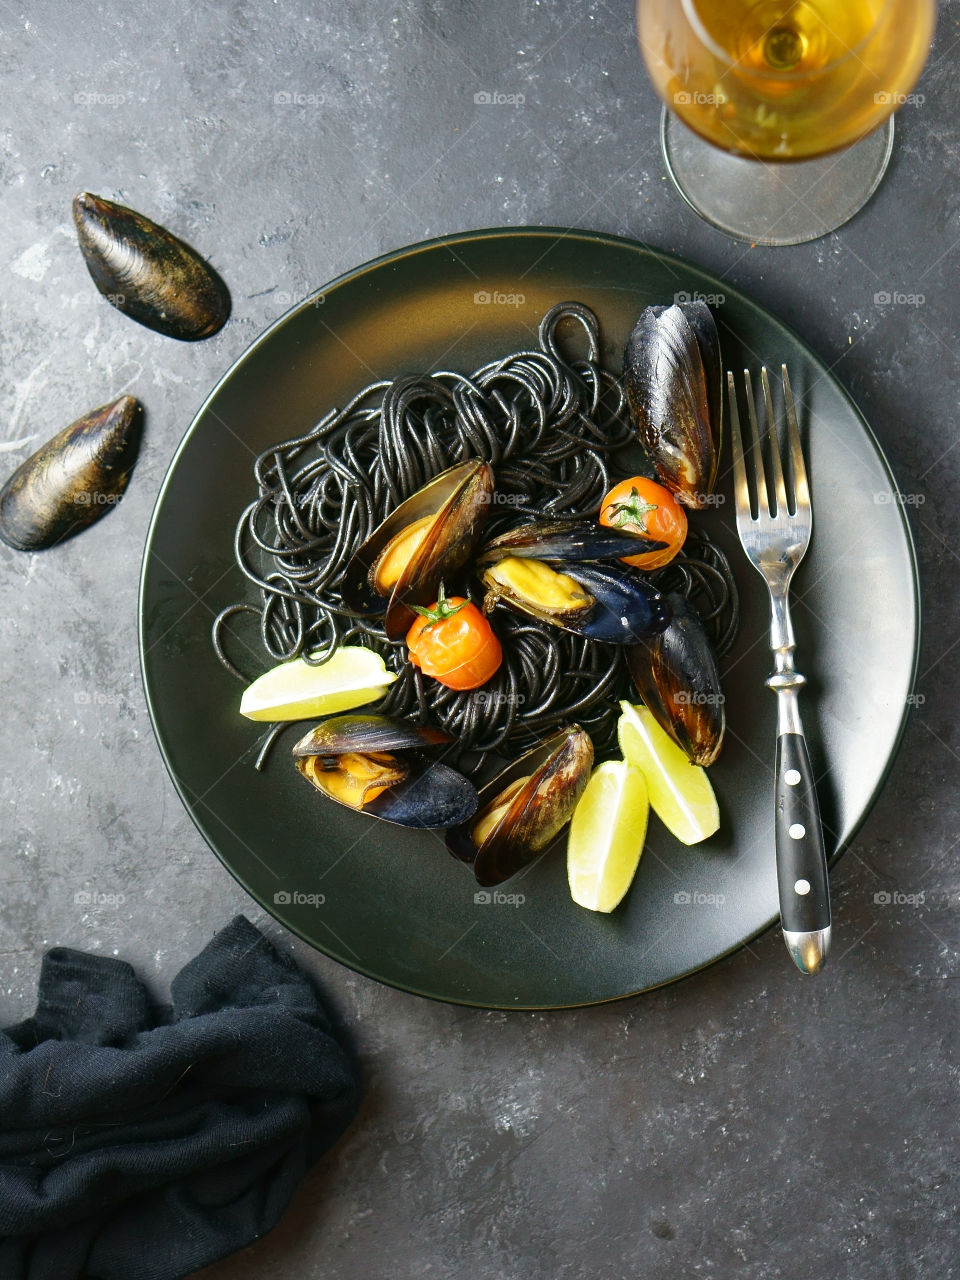 
Close-up of mussels and noodles served in plate